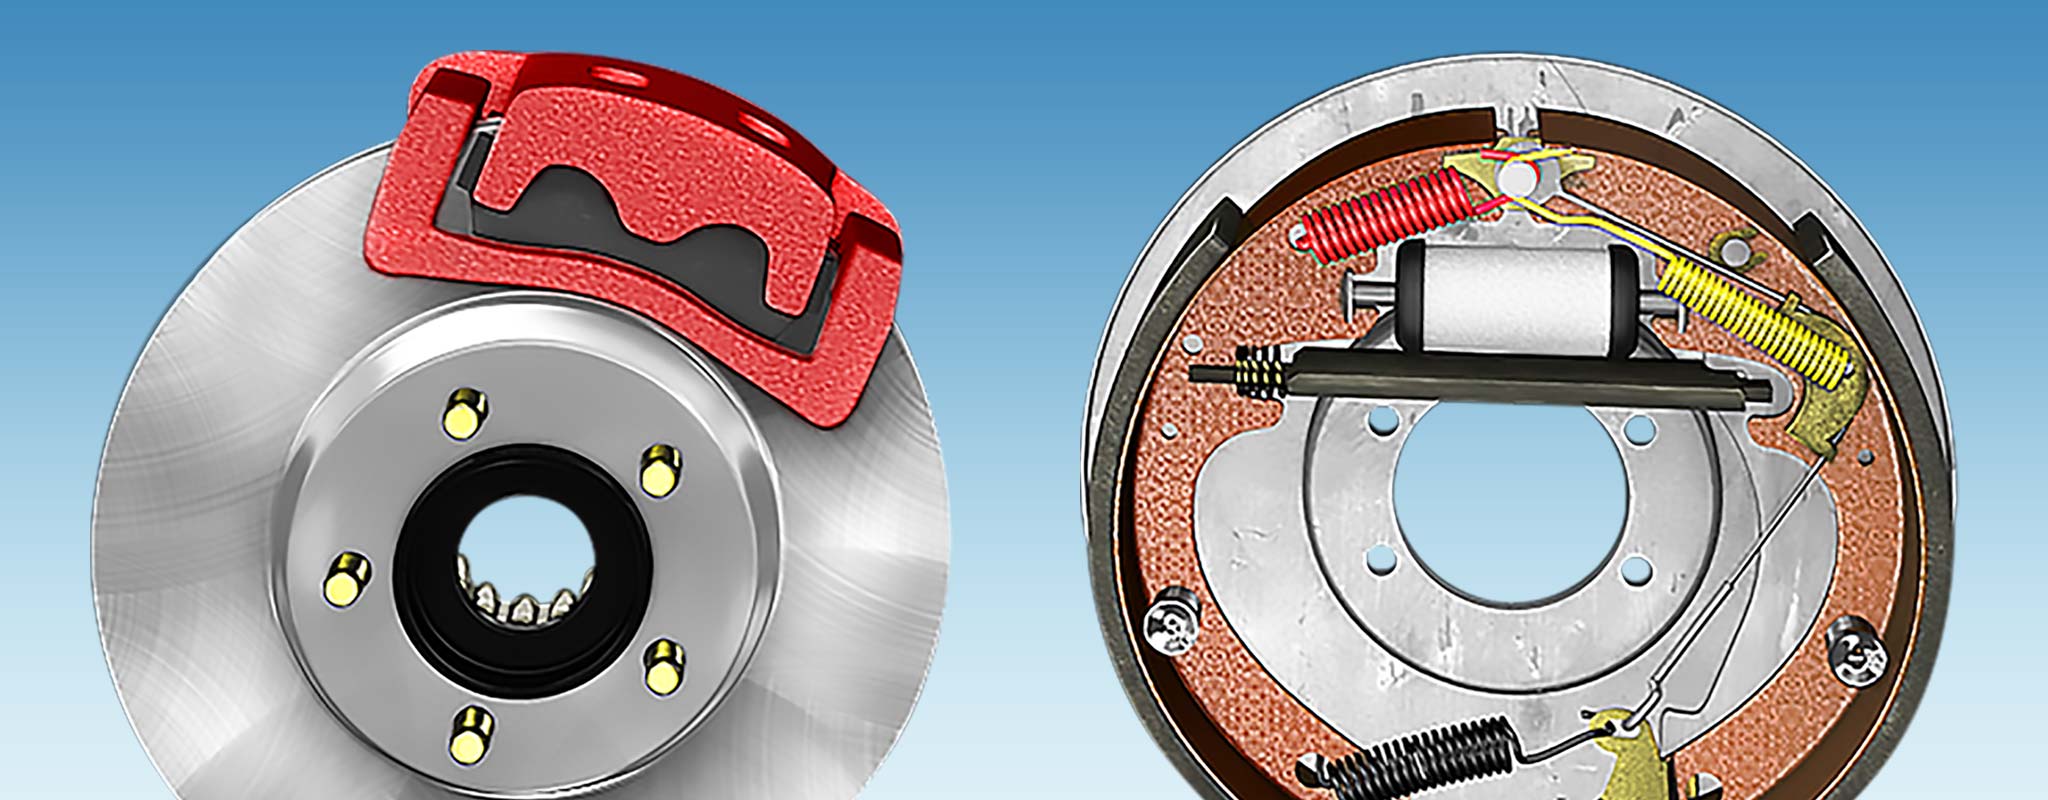 A side by side comparison of a disc brake and a drum brake.